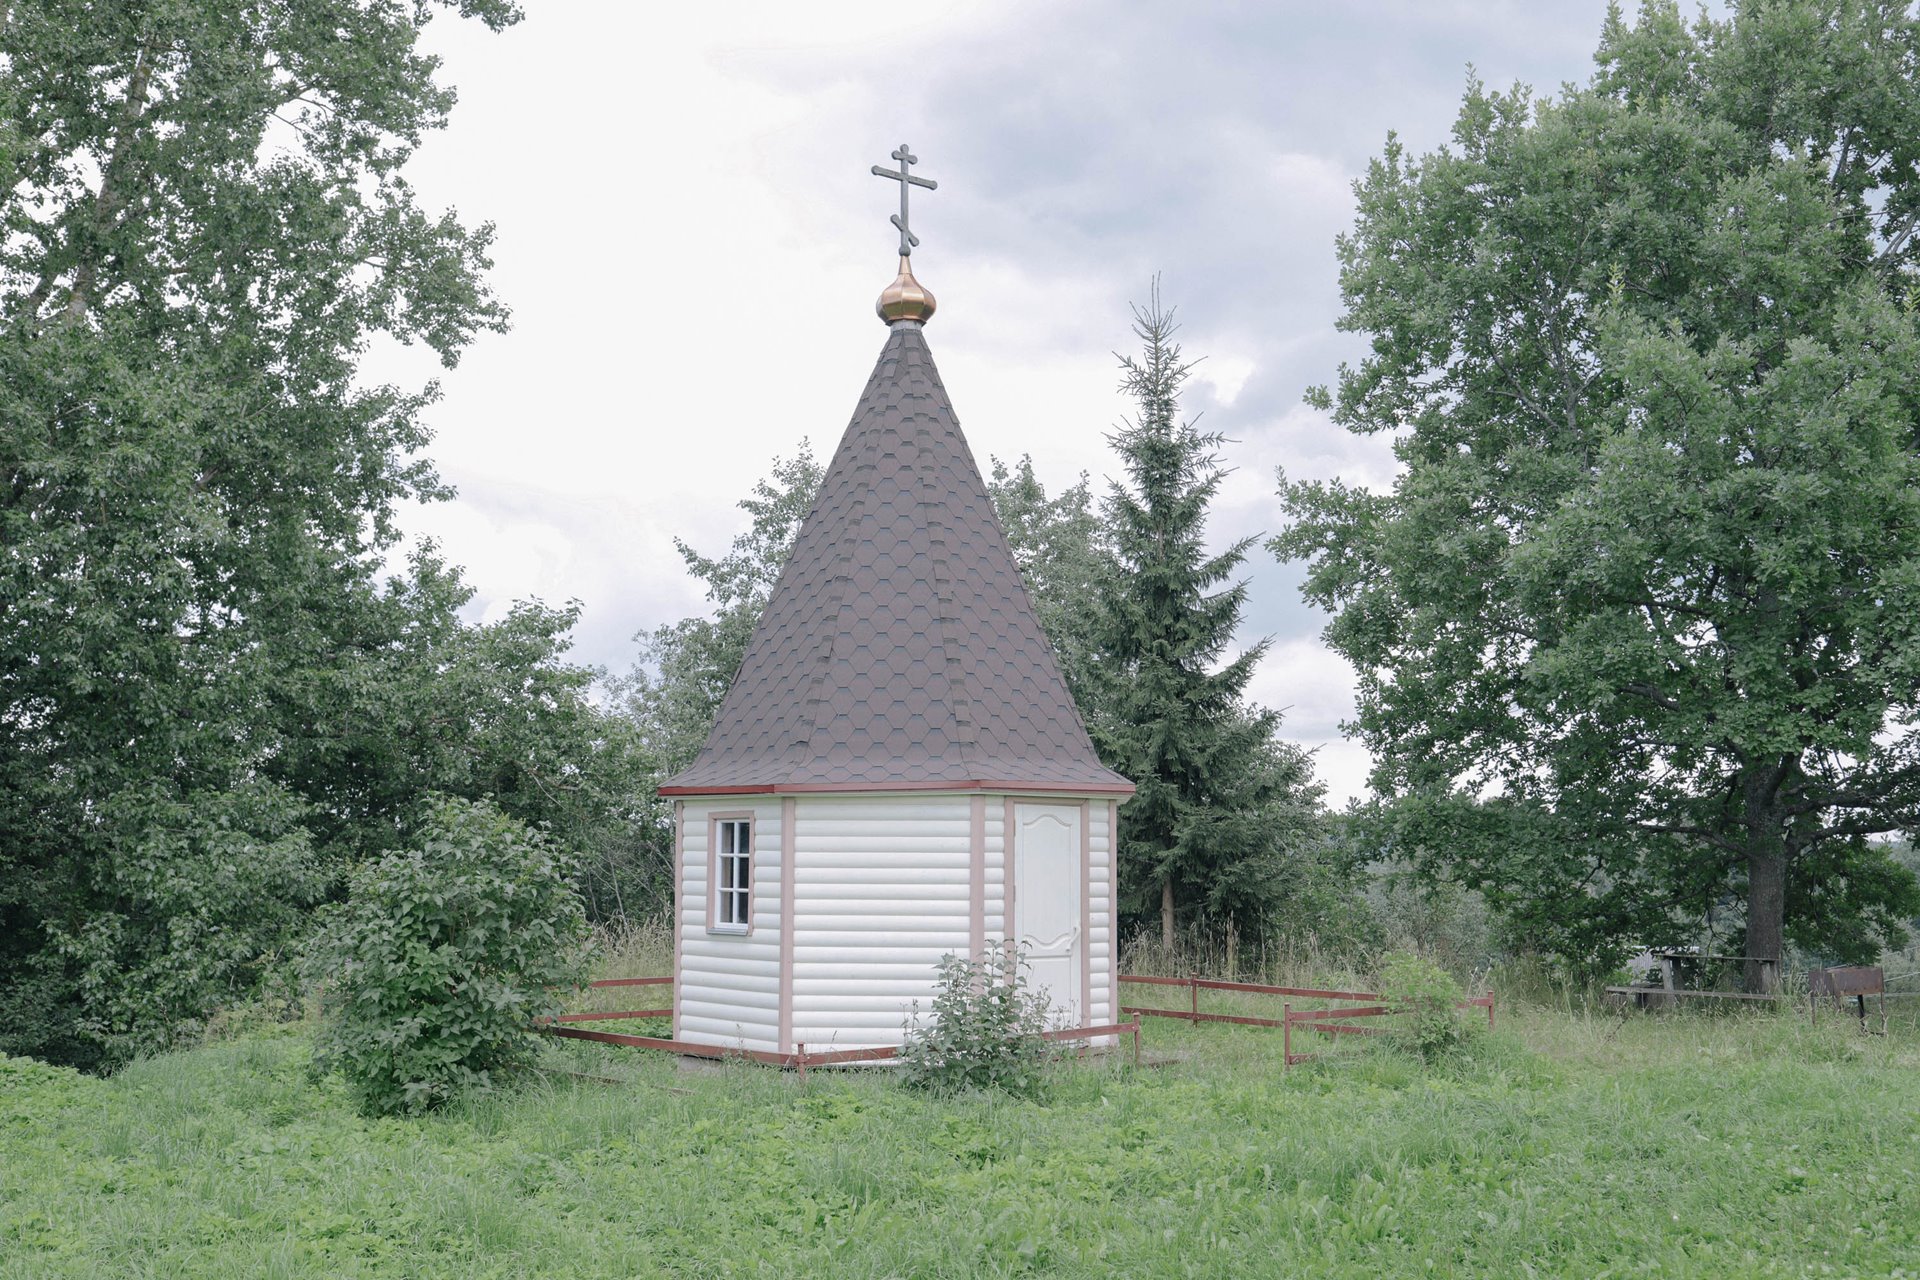 Each Sunday, Svetlana residents go for a walk and often visit this chapel in the nearby village of Mateevo.